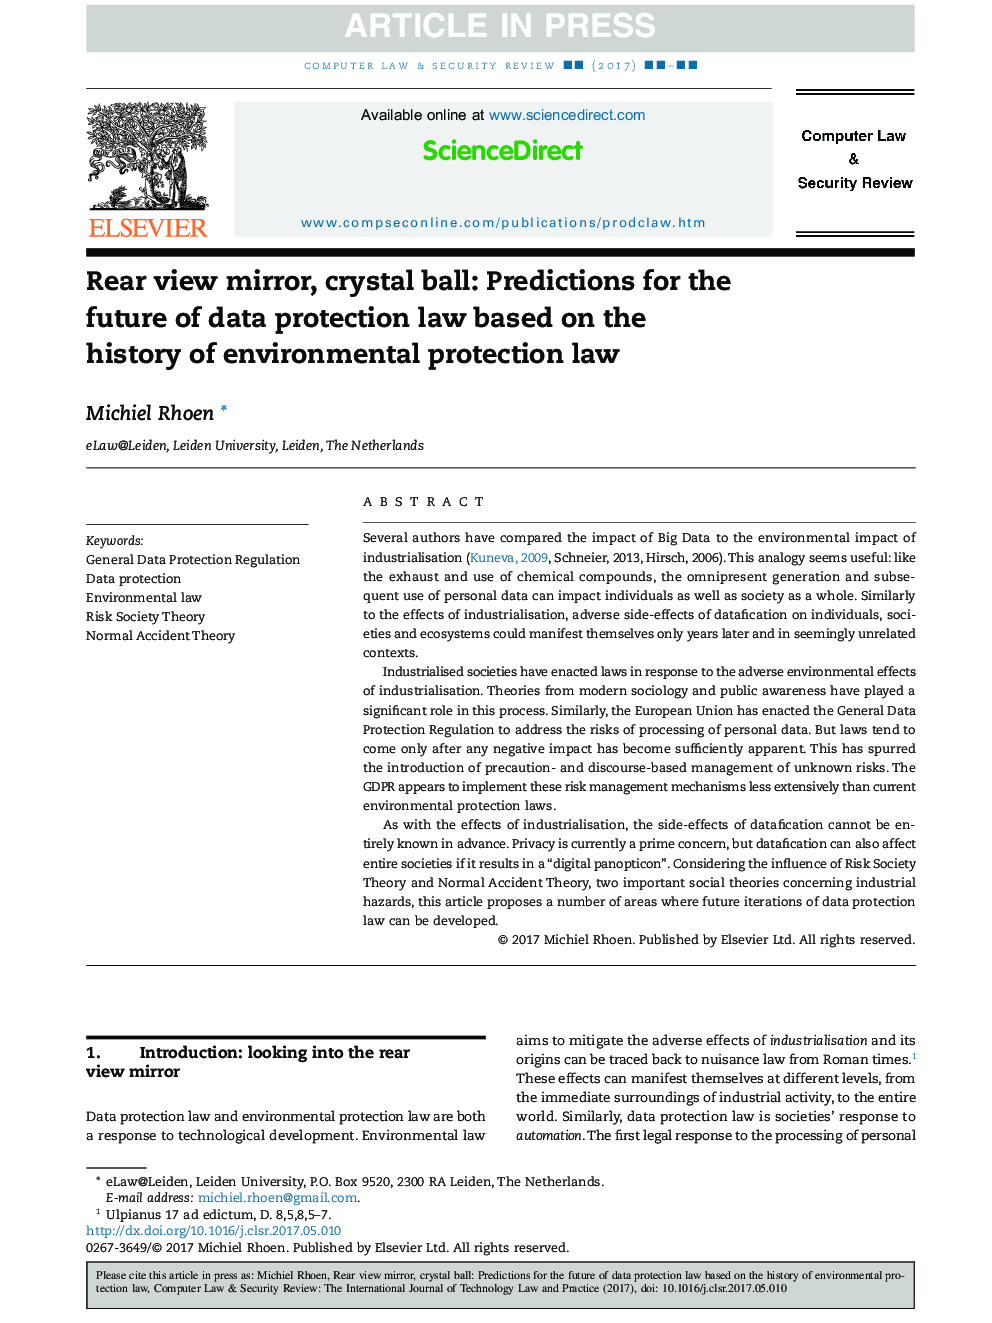 Rear view mirror, crystal ball: Predictions for the future of data protection law based on the history of environmental protection law